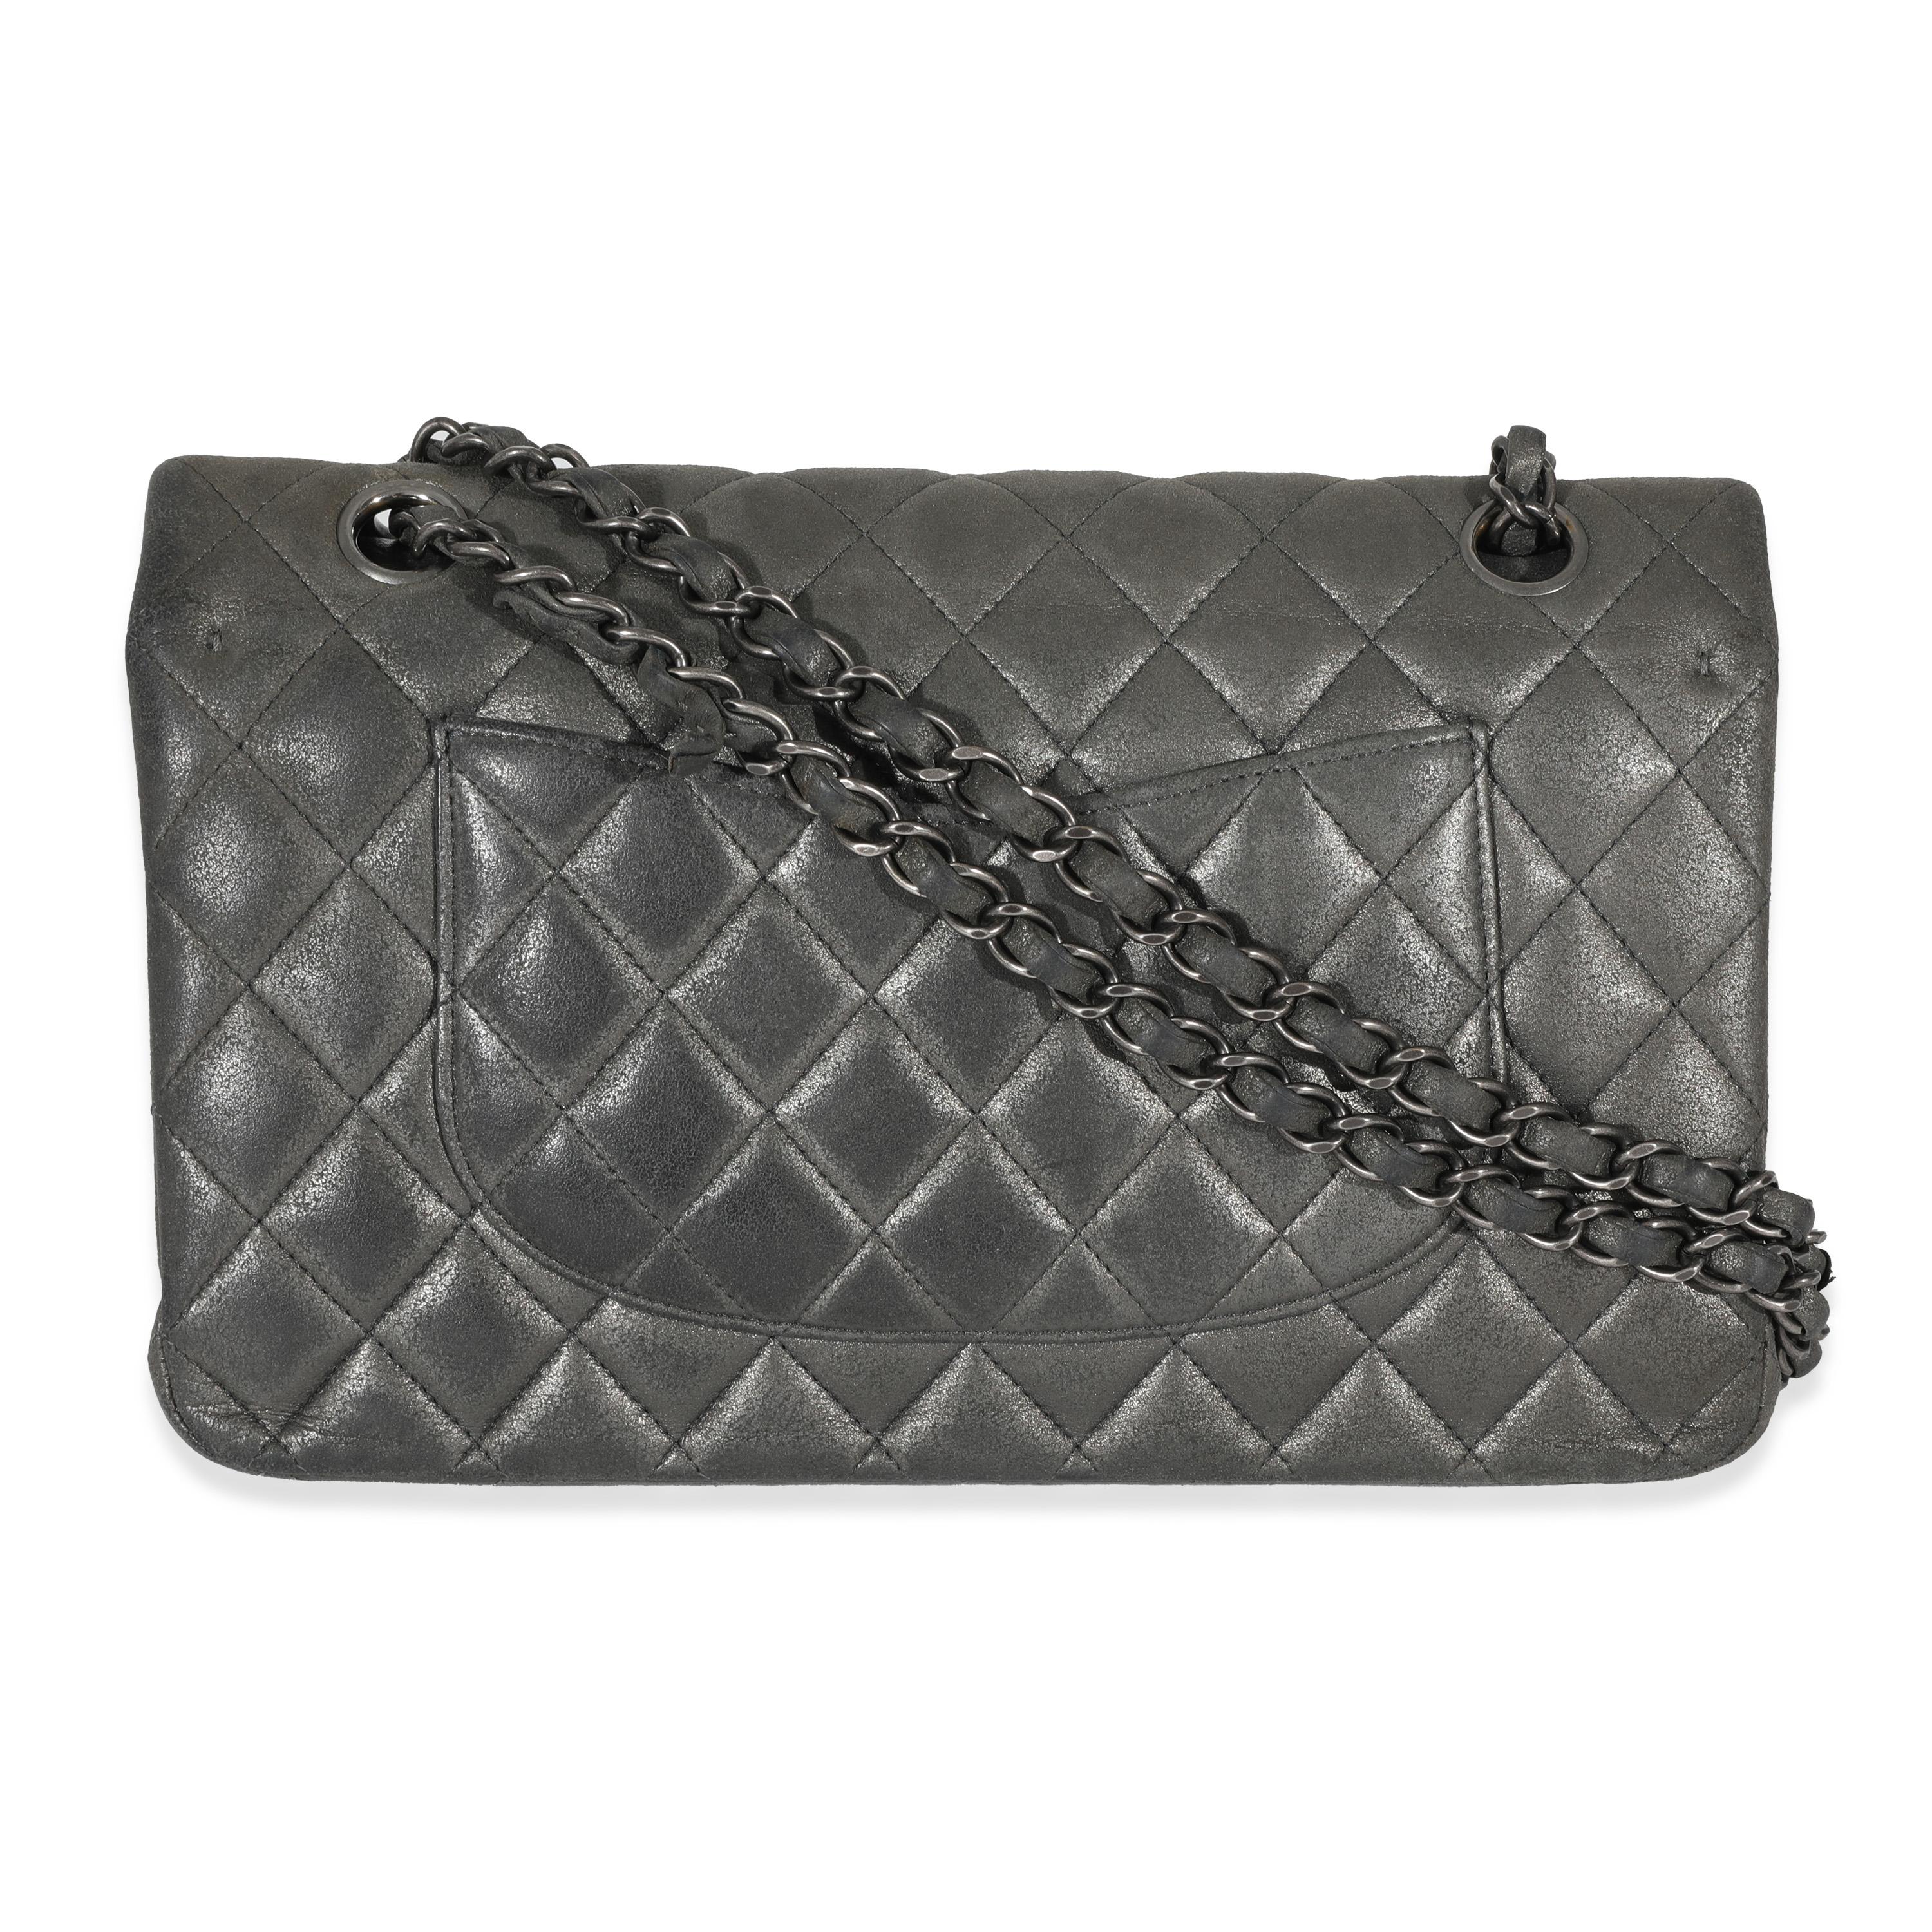 Chanel Grey Metallic Nubuck Medium Classic Double Flap In Excellent Condition For Sale In New York, NY